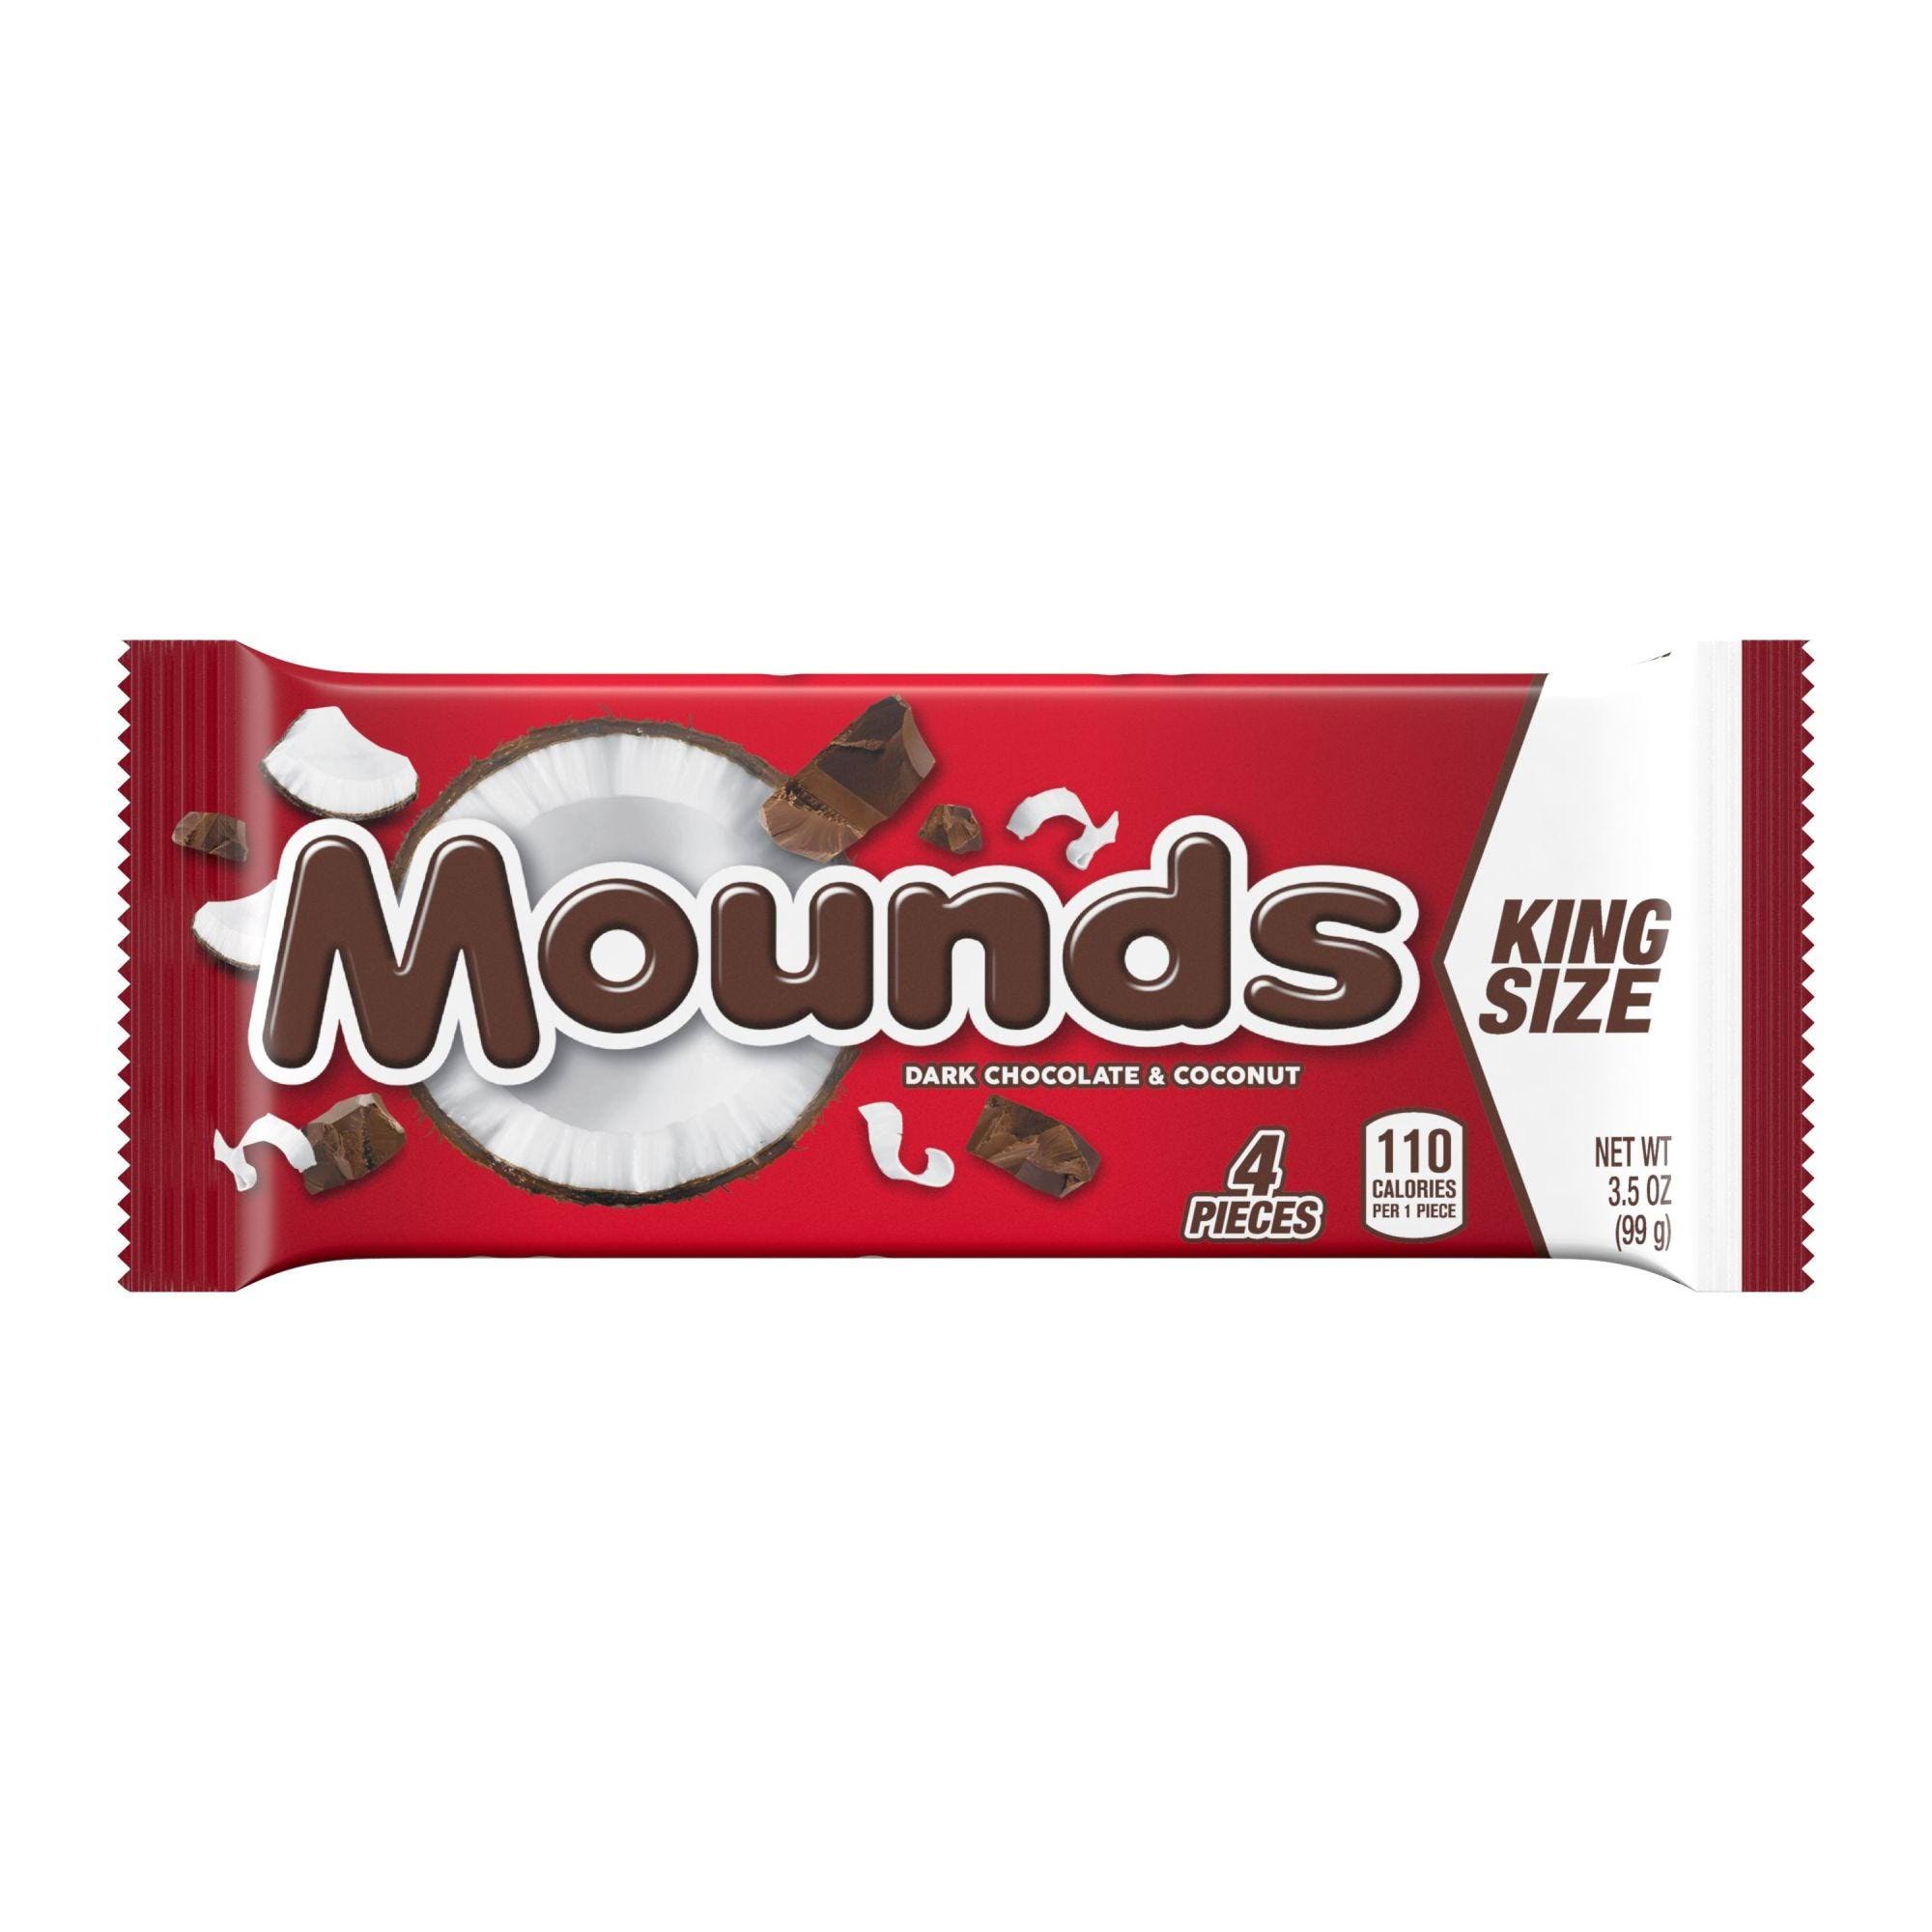 Mounds Dark Chocolate and Coconut King Size Pack, Gluten Free, 3.5 oz